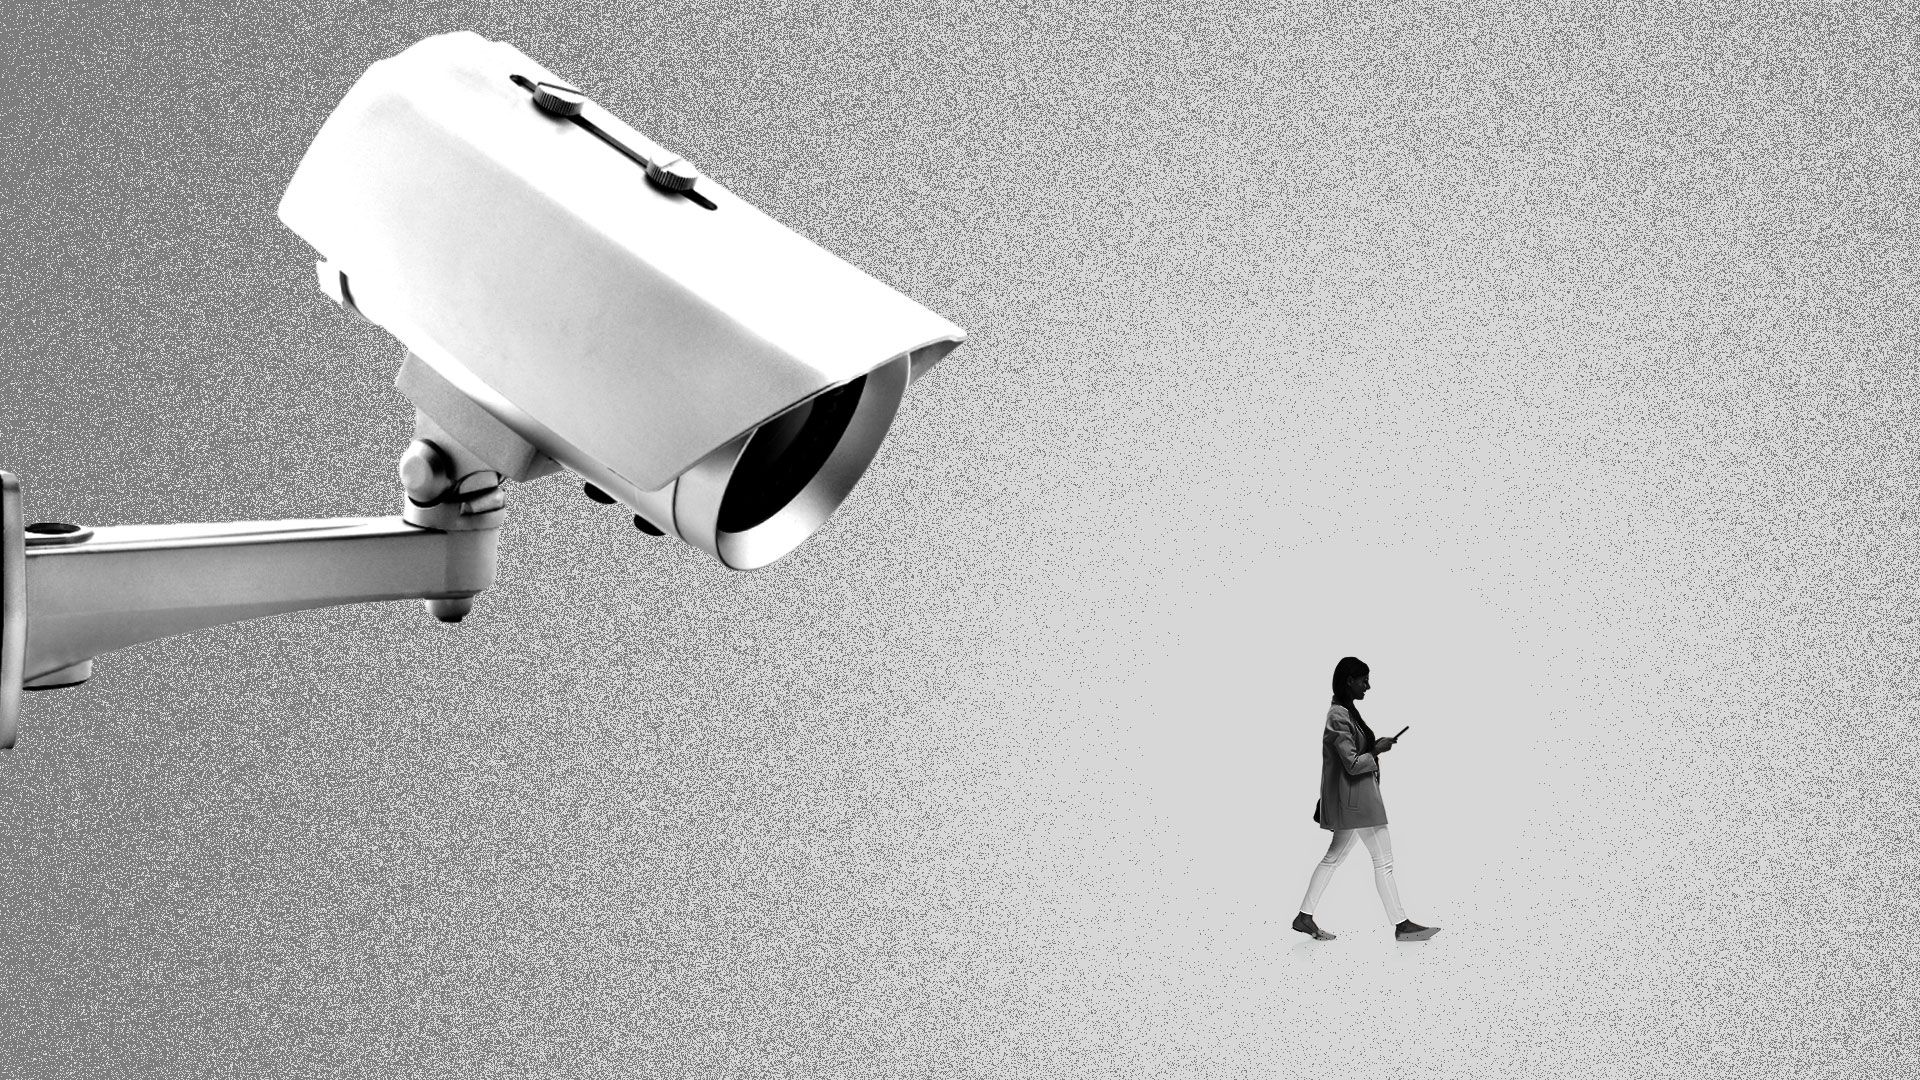 Illustration of a giant security camera watching a small person on their cell phone.